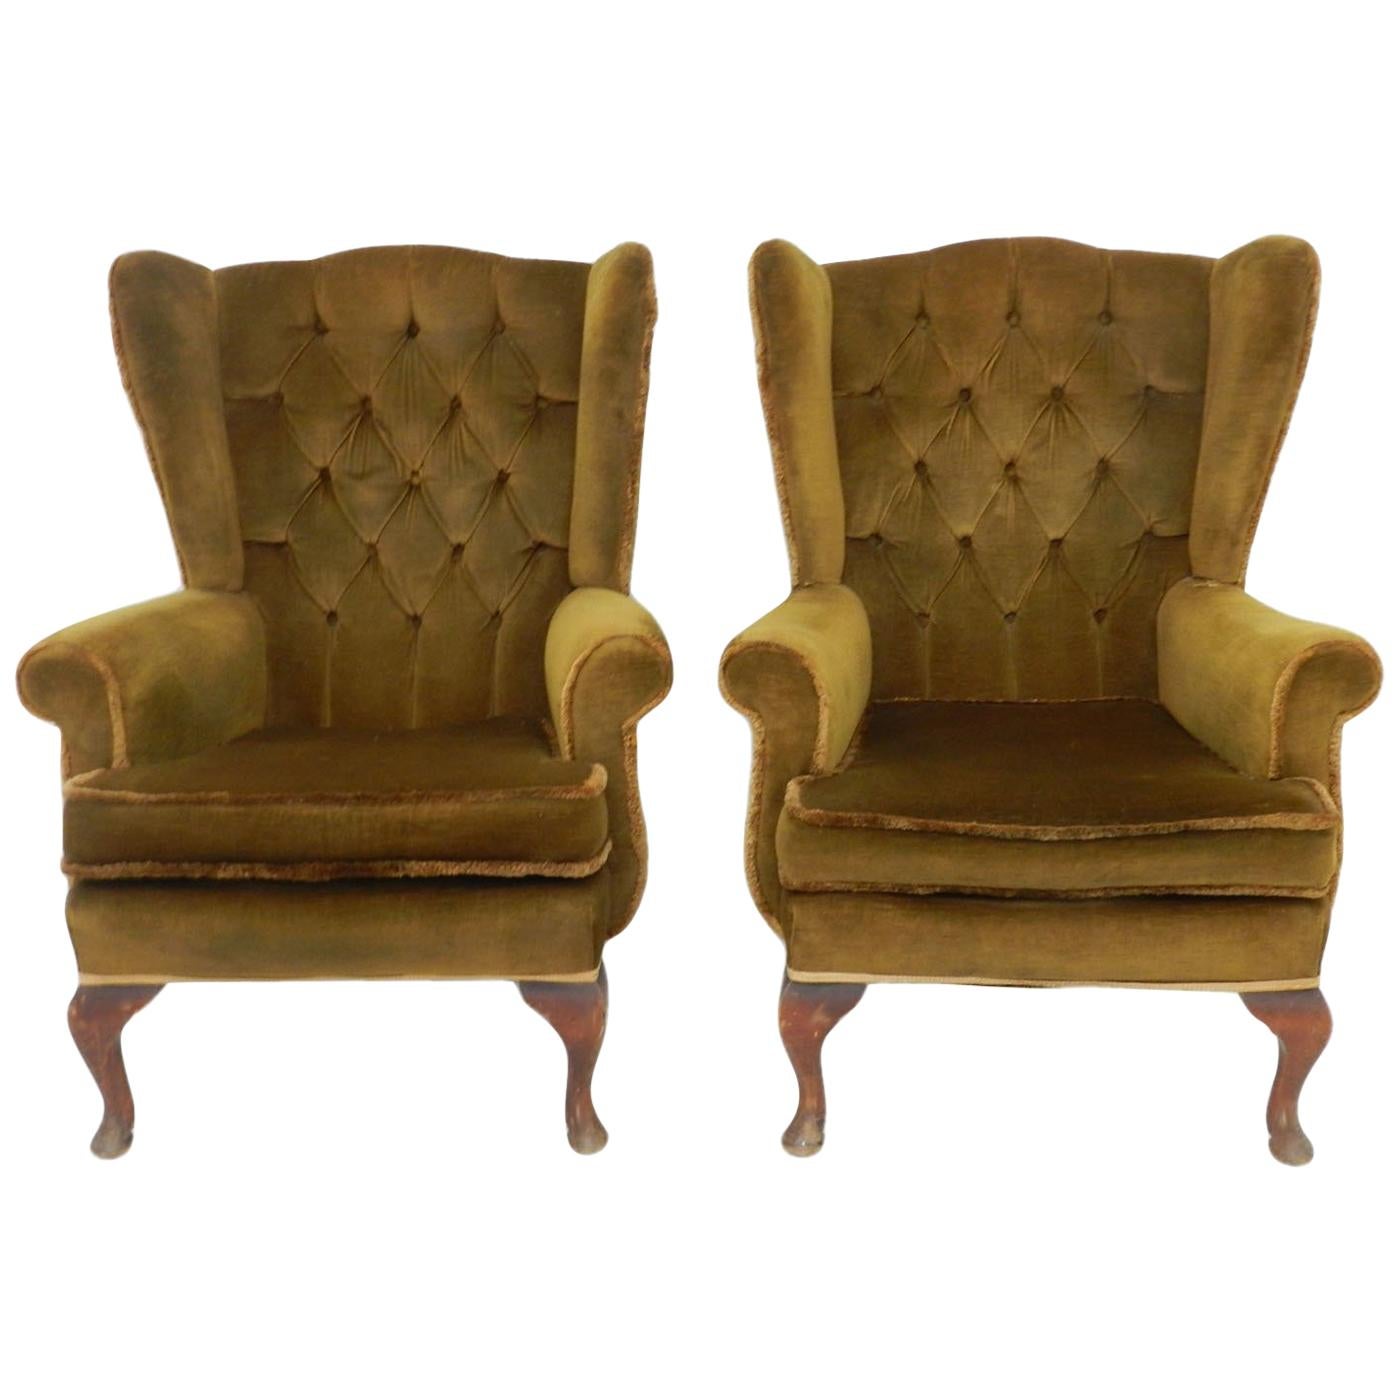 Pair of Wingback Armchairs Early 20th Century Includes Recovering Tufted Button